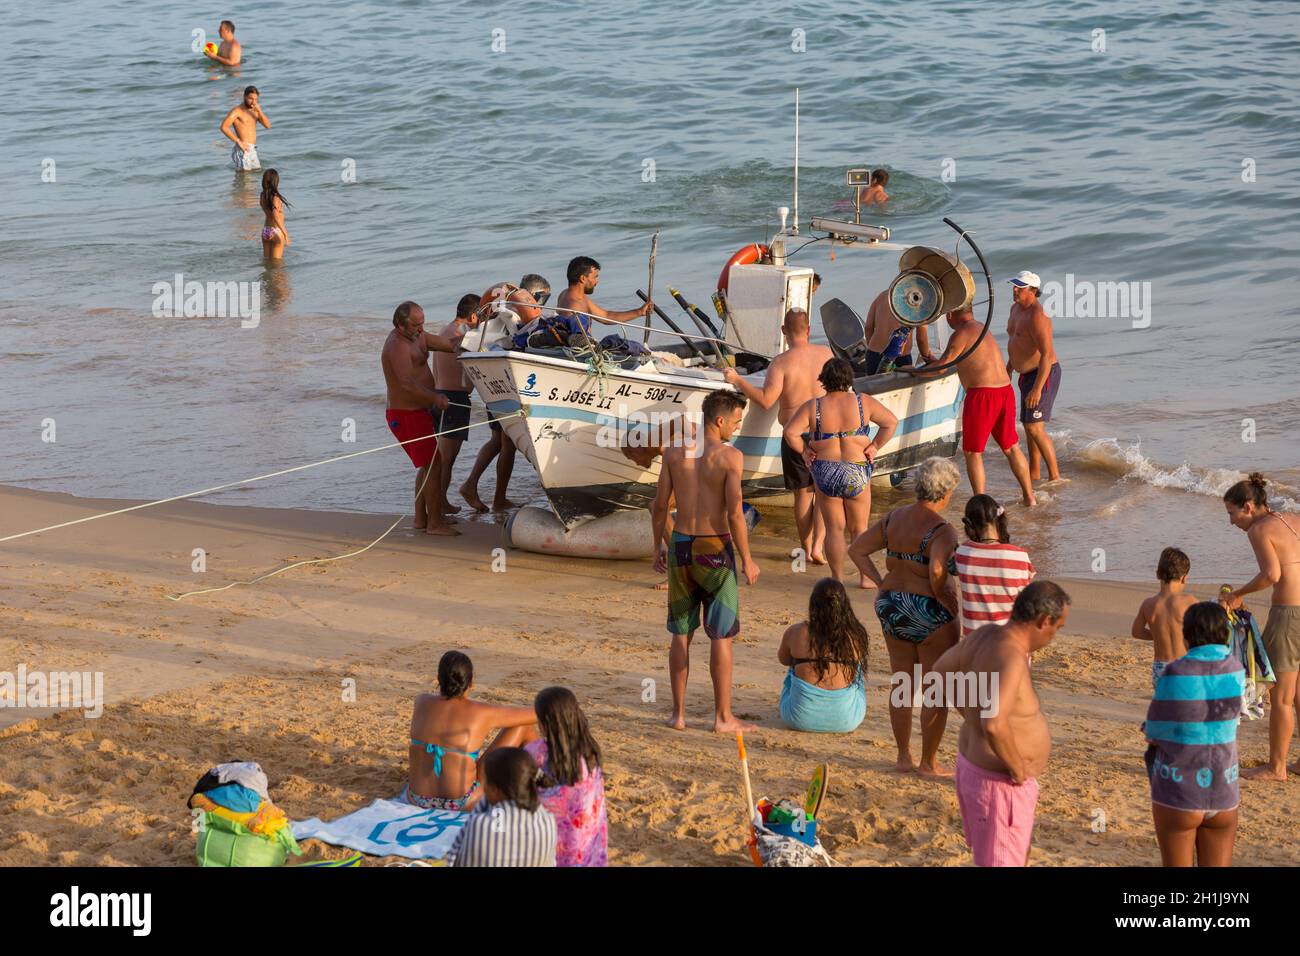 ALBUFEIRA, PORTUGAL - AUGUST 24, 2017: The last fishing ship of Olhos de Agua in Albufeira. The Tourists help the fisherman taking the boat in to the Stock Photo